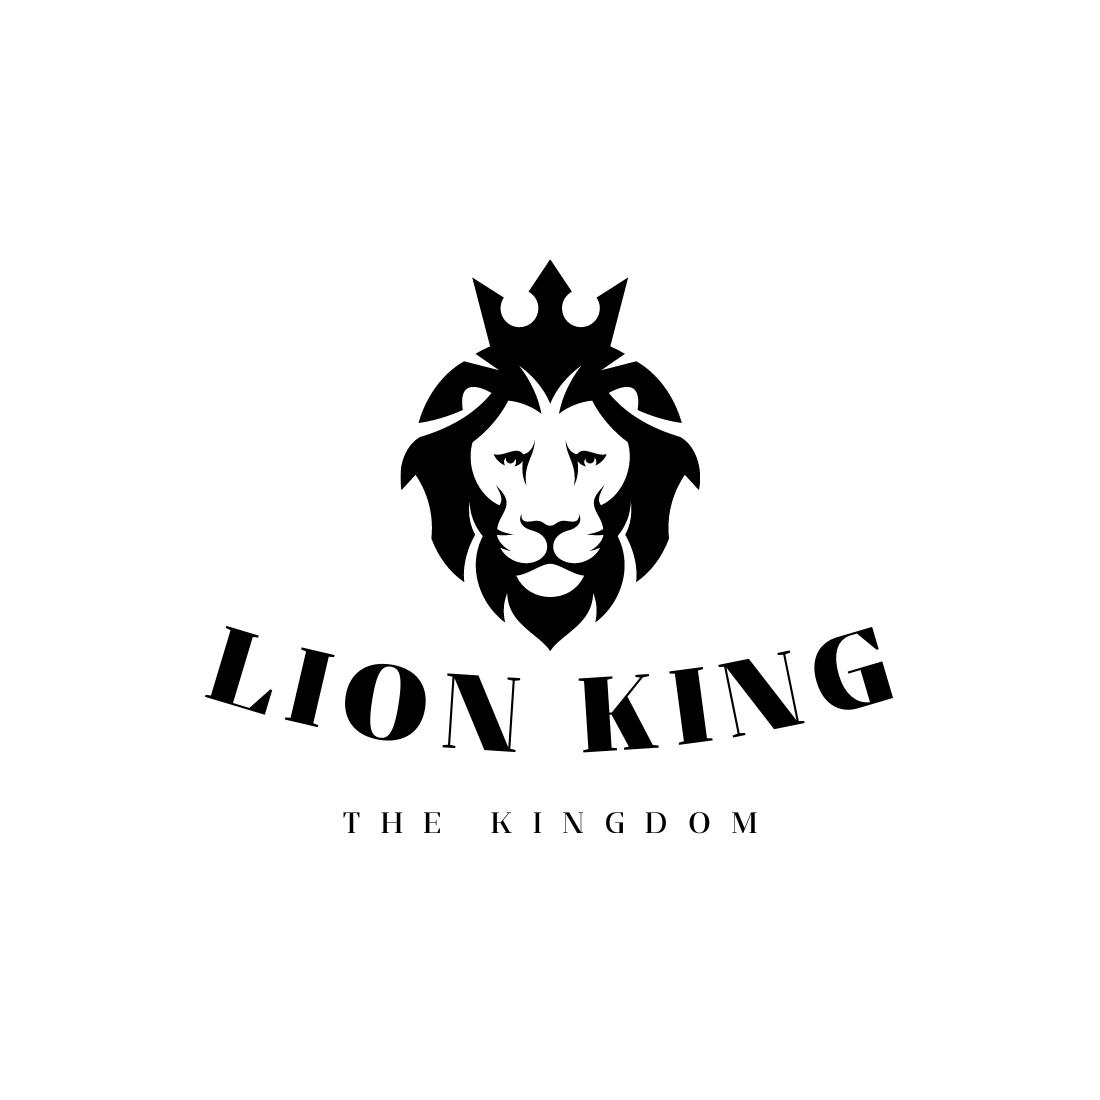 SIGN EVER Lion King Logo Stickers Exterior and Decals for Car Sides  Windshield Bumper Vinyl Decals L x H 15.00 cm x 15.00 cm Pack of 1 :  Amazon.in: Car & Motorbike